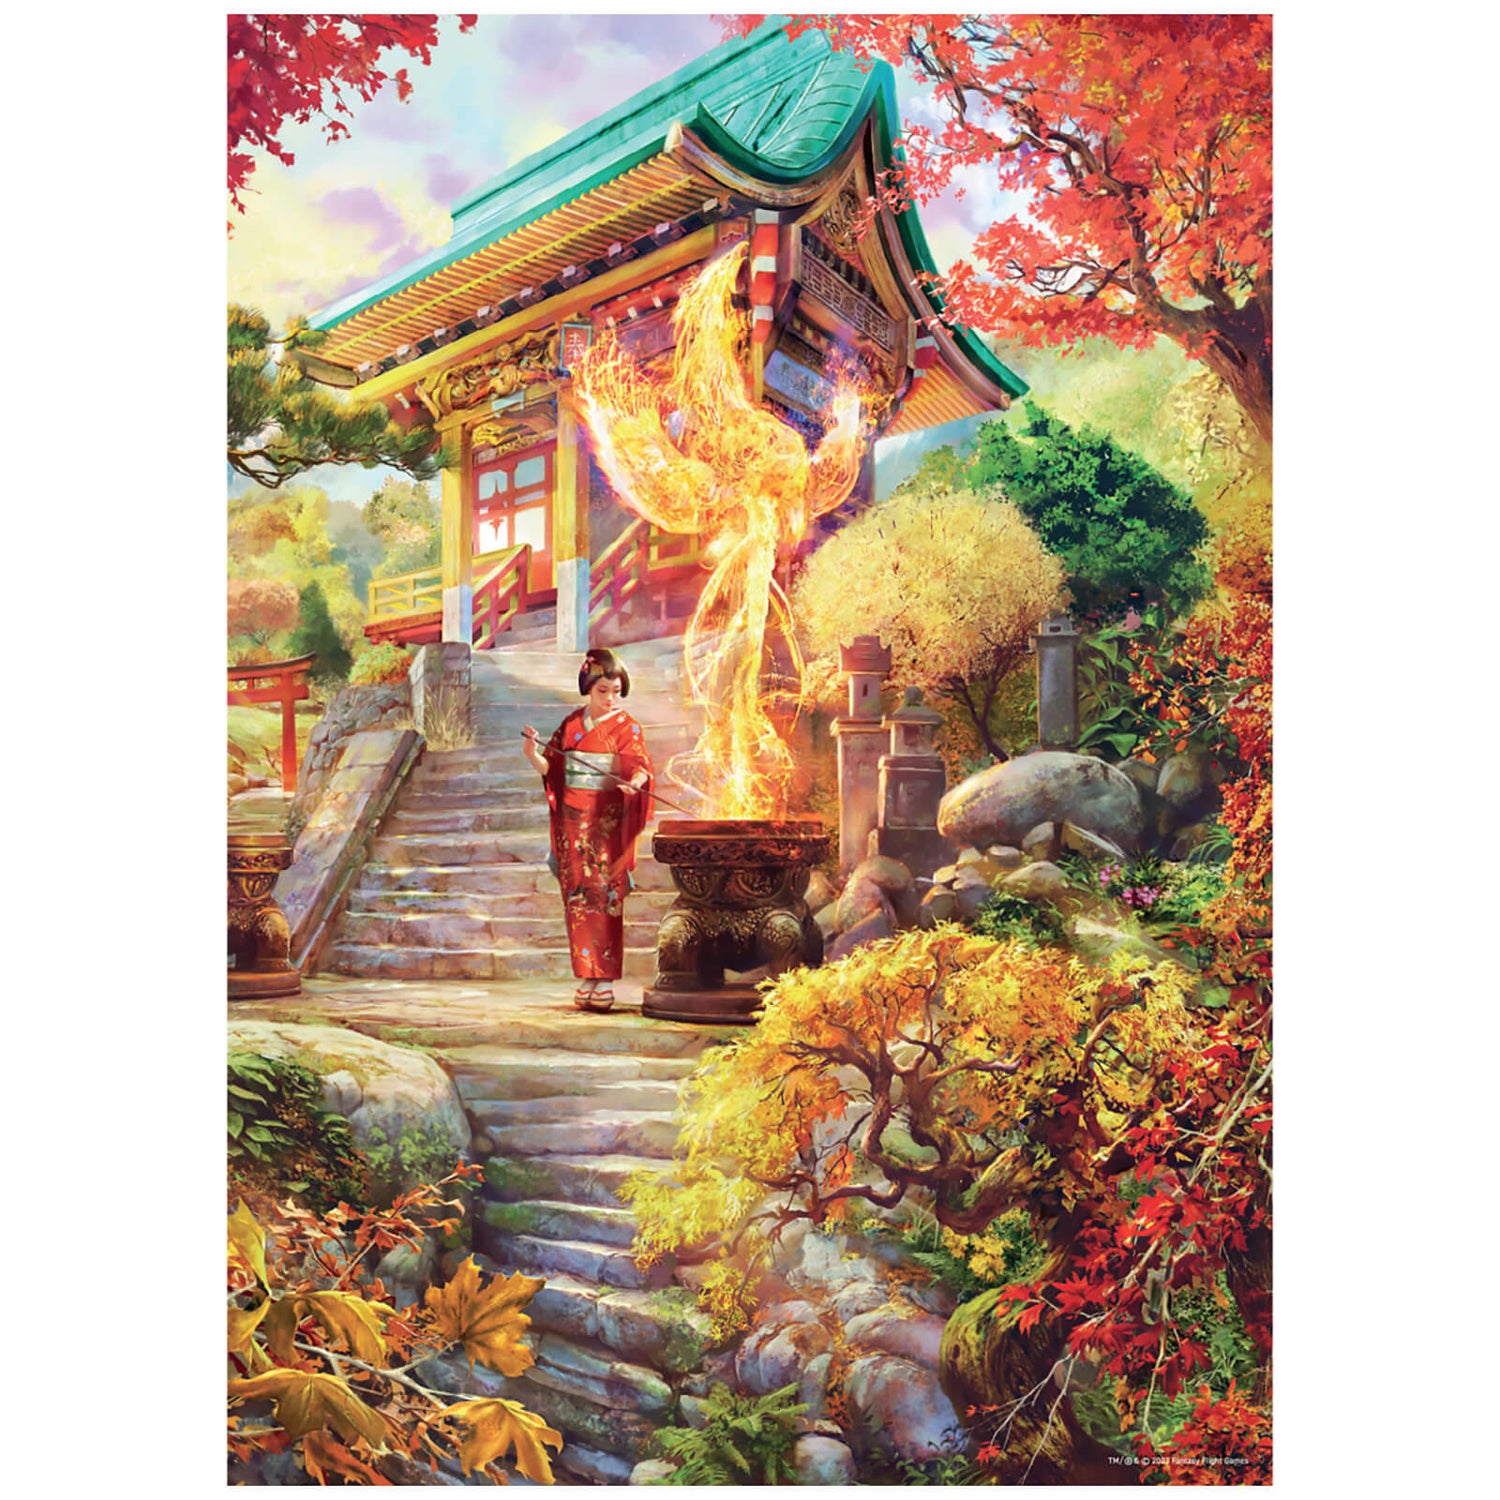 Legend of the Five Rings Limited Edition Art Print